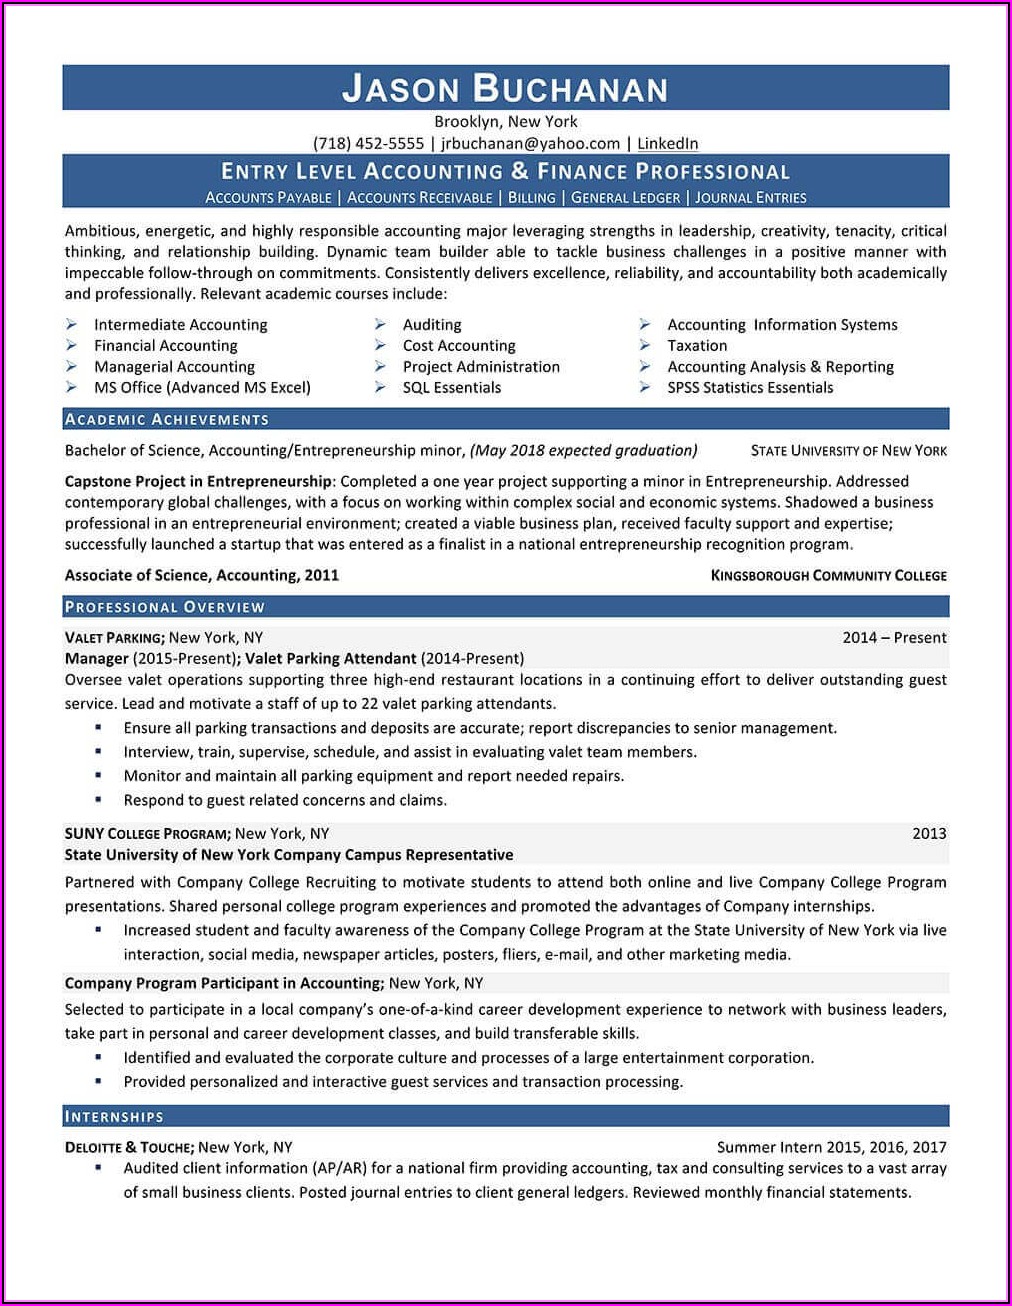 Monster professional resume writing service review